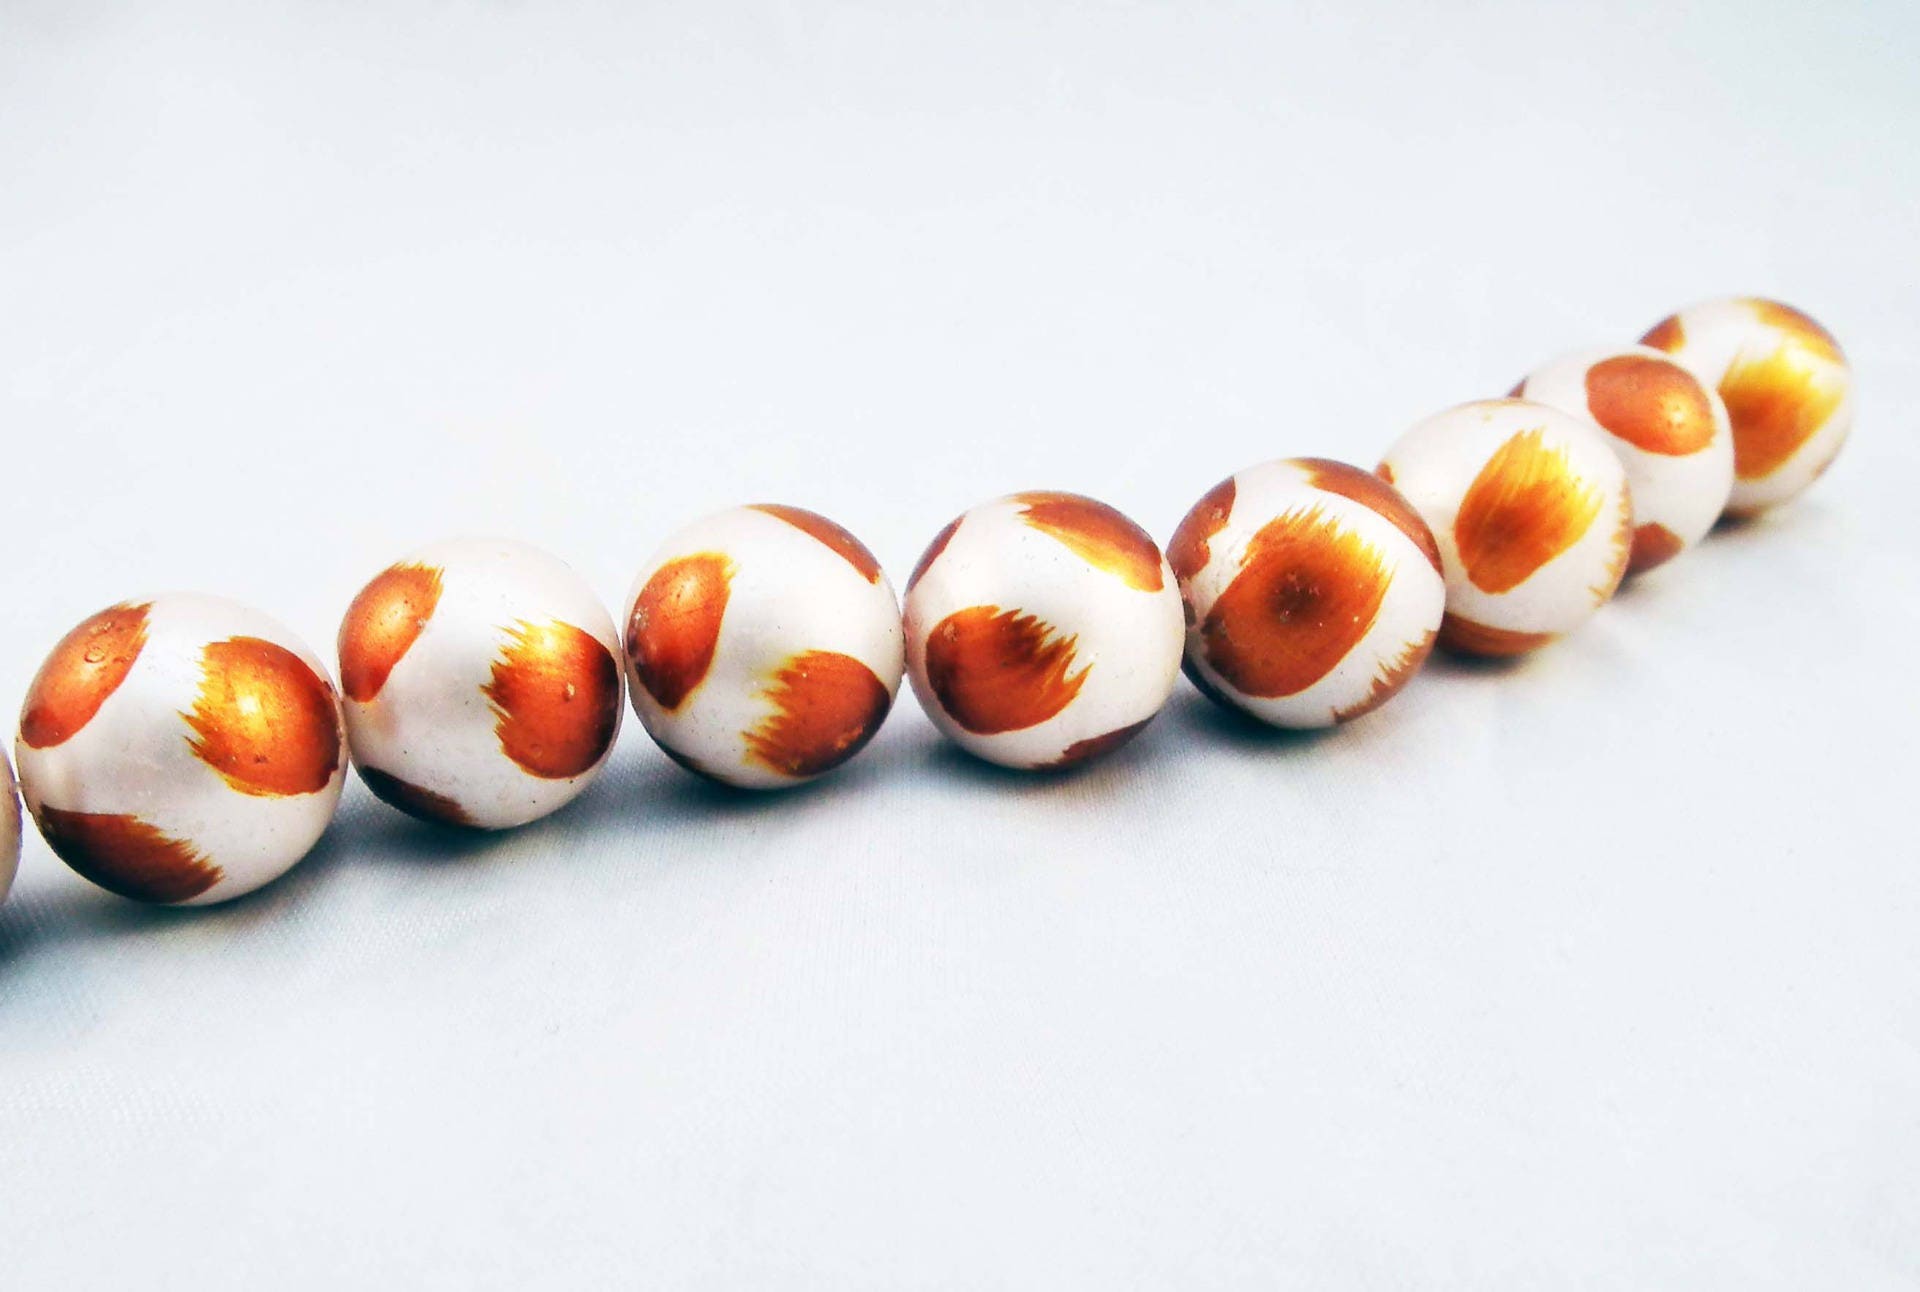 INV102 Rare batch of 10 Glass Pearls Patterns Speckled Leopard Jungle Tribal Orange Reflections White Beige Cream